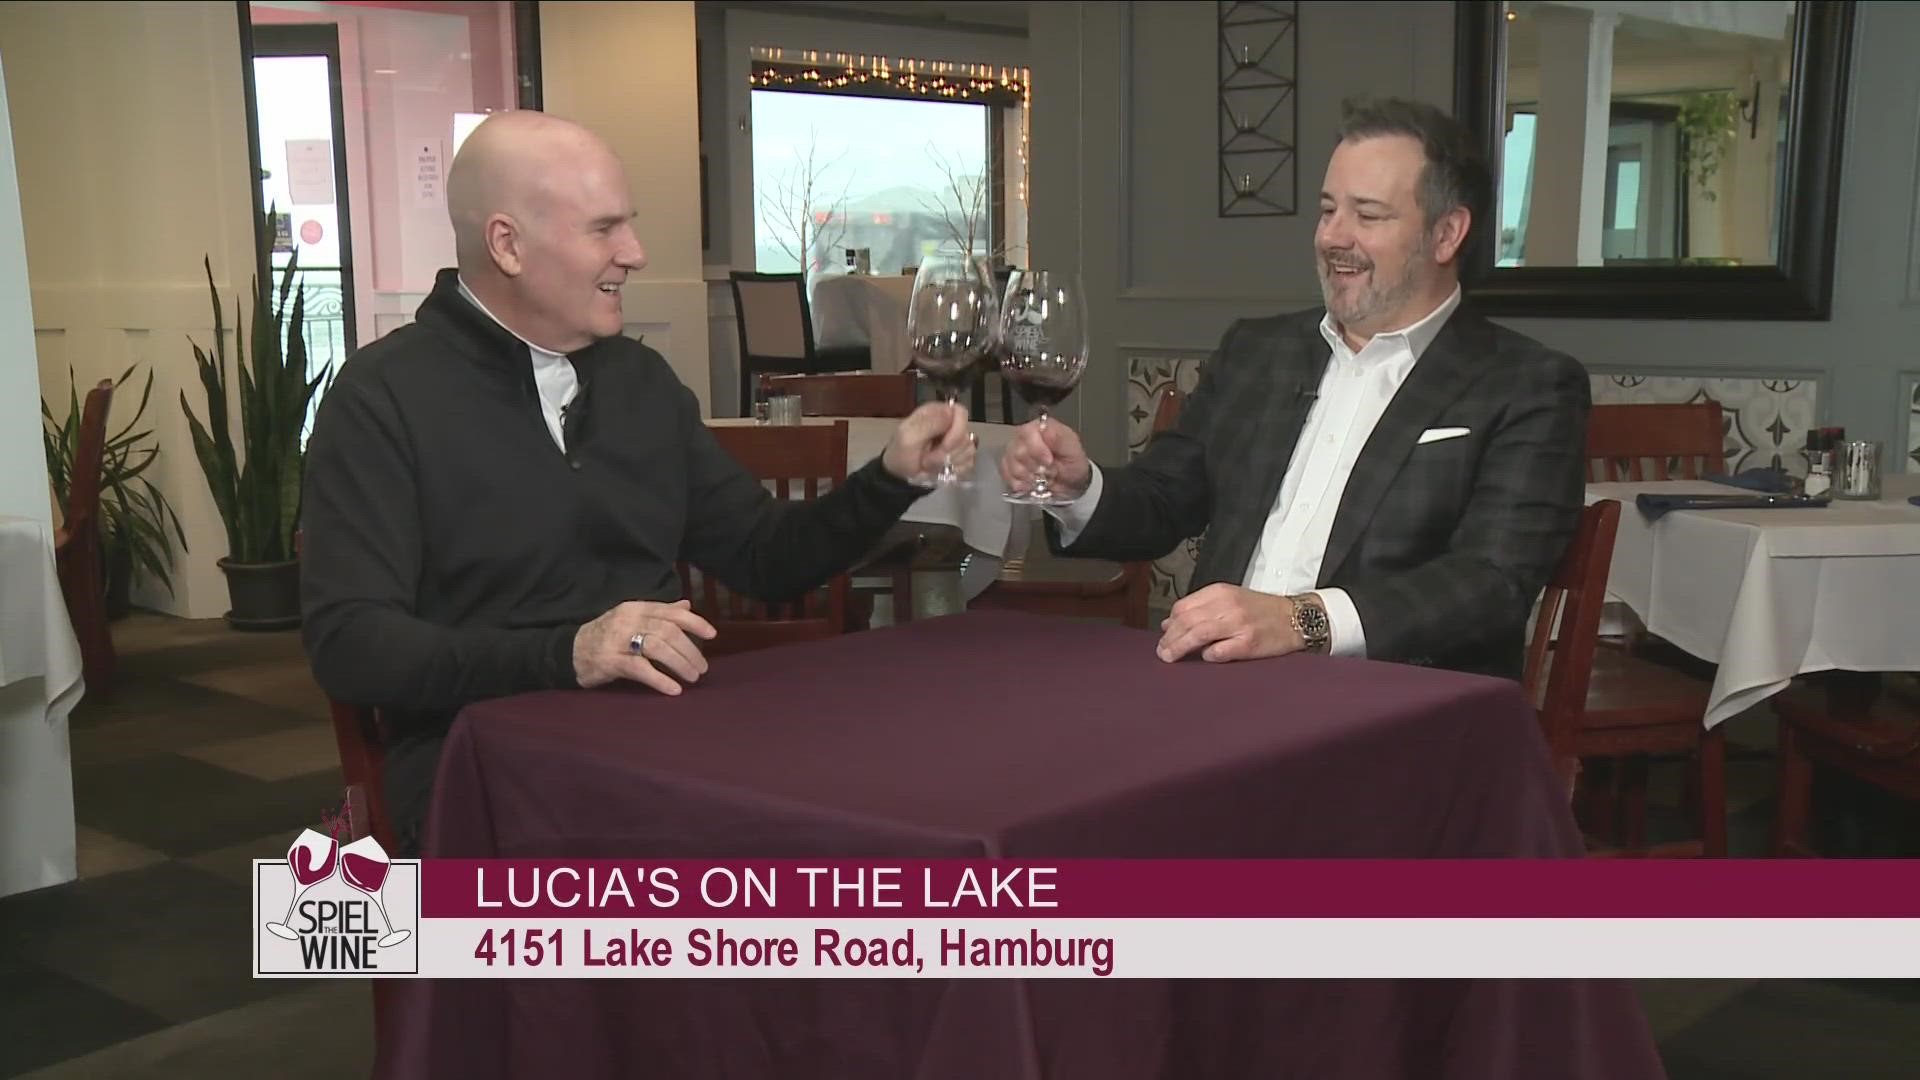 Spiel the Wine -- January 28 -- Segment 3 THIS VIDEO IS SPONSORED BY LUCIA'S ON THE LAKE AND RIVER SPRING LODGE